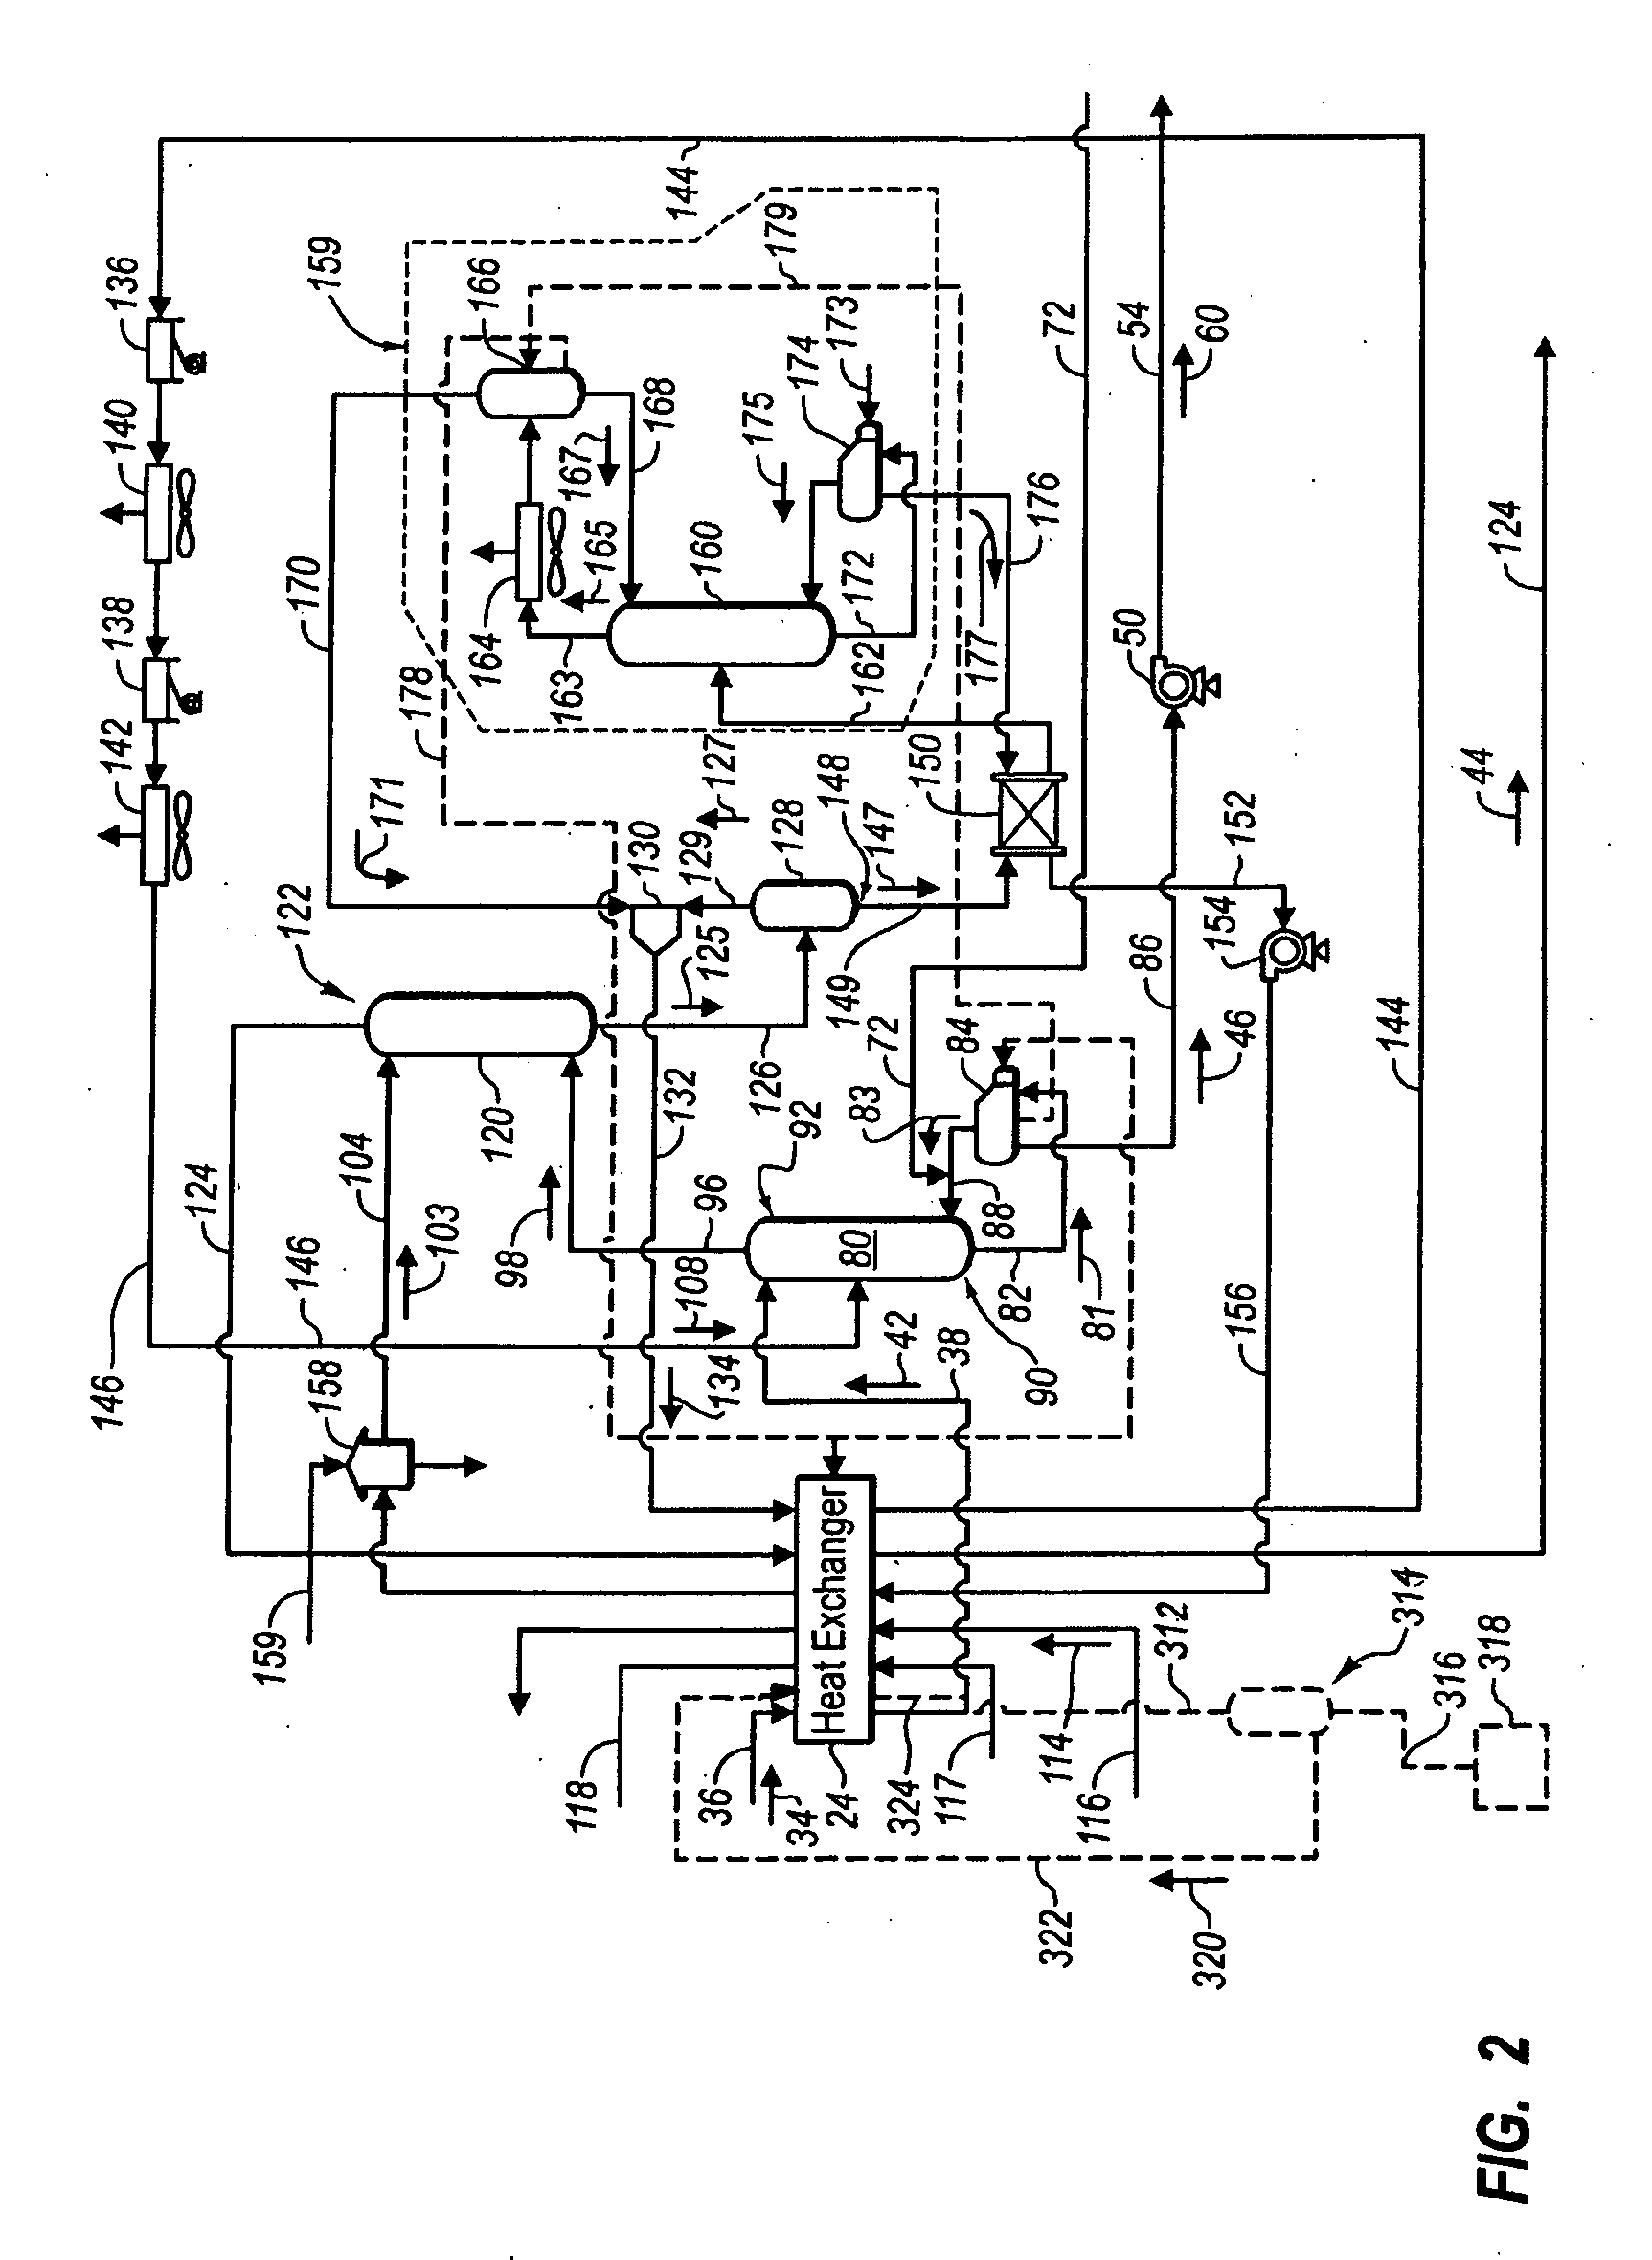 System for Dehydrating and Cooling a Produced Gas to Remove Natural Gas Liquids and Waste Liquids